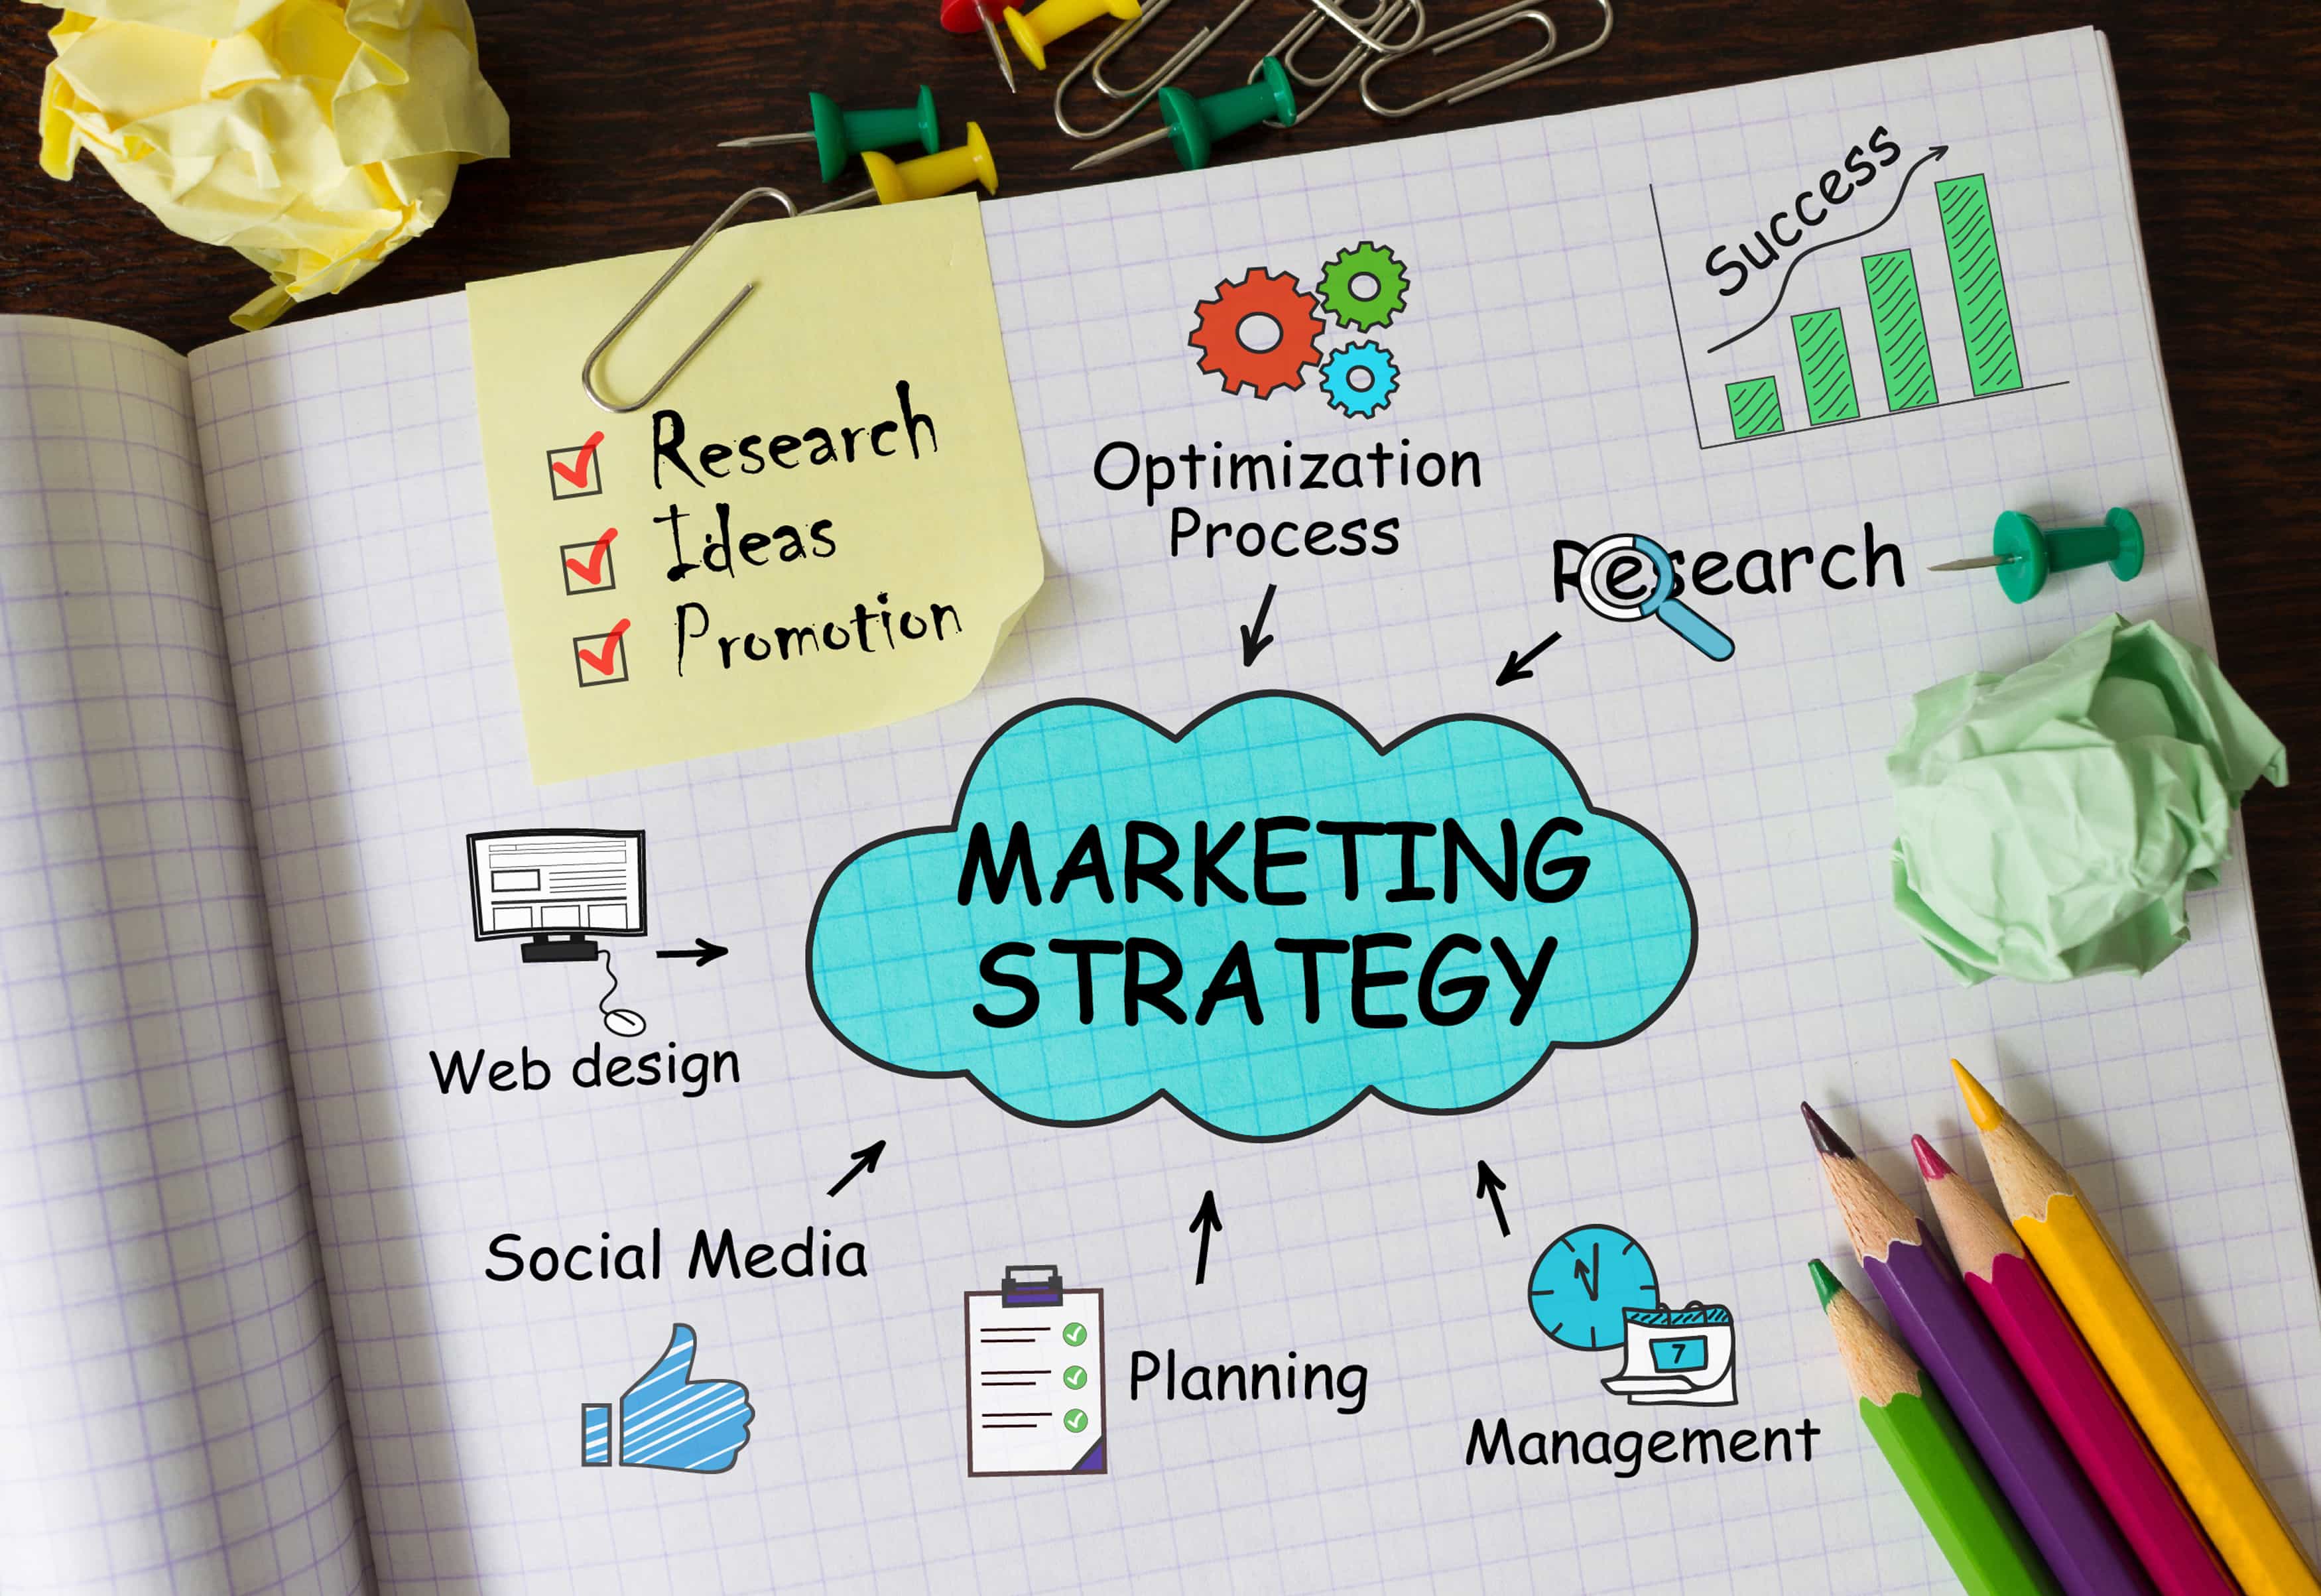 8 Tips To Take Your Marketing Efforts To The Next Level